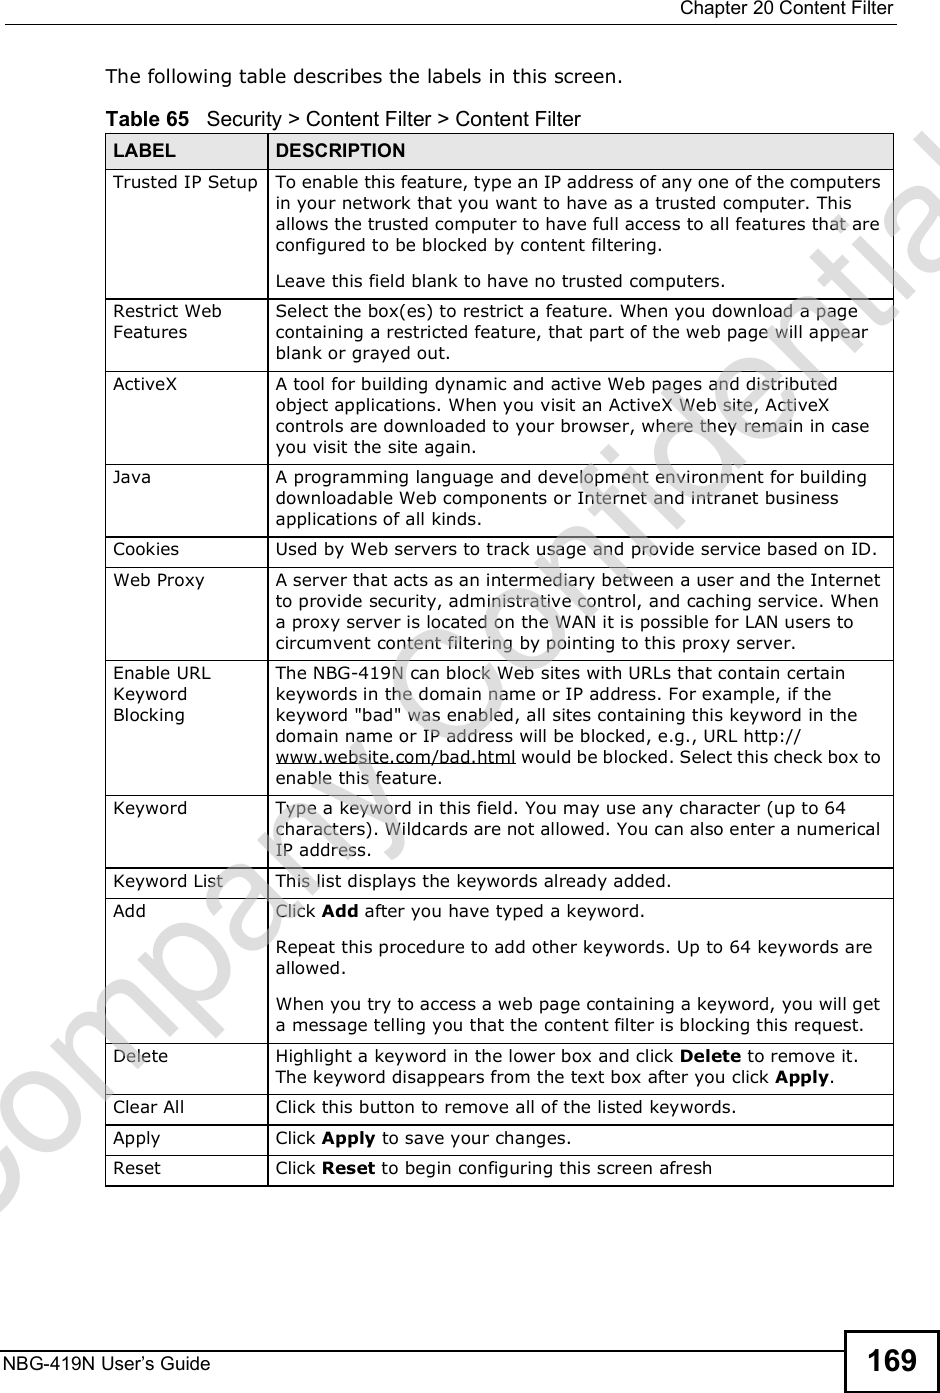  Chapter 20Content FilterNBG-419N User s Guide 169The following table describes the labels in this screen.Table 65   Security &gt; Content Filter &gt; Content FilterLABEL DESCRIPTIONTrusted IP Setup To enable this feature, type an IP address of any one of the computers in your network that you want to have as a trusted computer. This allows the trusted computer to have full access to all features that are configured to be blocked by content filtering.Leave this field blank to have no trusted computers.Restrict Web FeaturesSelect the box(es) to restrict a feature. When you download a page containing a restricted feature, that part of the web page will appear blank or grayed out.ActiveX  A tool for building dynamic and active Web pages and distributed object applications. When you visit an ActiveX Web site, ActiveX controls are downloaded to your browser, where they remain in case you visit the site again. Java A programming language and development environment for building downloadable Web components or Internet and intranet business applications of all kinds.Cookies Used by Web servers to track usage and provide service based on ID. Web Proxy A server that acts as an intermediary between a user and the Internet to provide security, administrative control, and caching service. When a proxy server is located on the WAN it is possible for LAN users to circumvent content filtering by pointing to this proxy server. Enable URL Keyword BlockingThe NBG-419N can block Web sites with URLs that contain certain keywords in the domain name or IP address. For example, if the keyword &quot;bad&quot; was enabled, all sites containing this keyword in the domain name or IP address will be blocked, e.g., URL http://www.website.com/bad.html would be blocked. Select this check box to enable this feature.Keyword Type a keyword in this field. You may use any character (up to 64 characters). Wildcards are not allowed. You can also enter a numerical IP address.Keyword List This list displays the keywords already added. Add  Click Add after you have typed a keyword. Repeat this procedure to add other keywords. Up to 64 keywords are allowed.When you try to access a web page containing a keyword, you will get a message telling you that the content filter is blocking this request.Delete Highlight a keyword in the lower box and click Delete to remove it. The keyword disappears from the text box after you click Apply.Clear All Click this button to remove all of the listed keywords.Apply Click Apply to save your changes.Reset Click Reset to begin configuring this screen afreshCompany Confidential